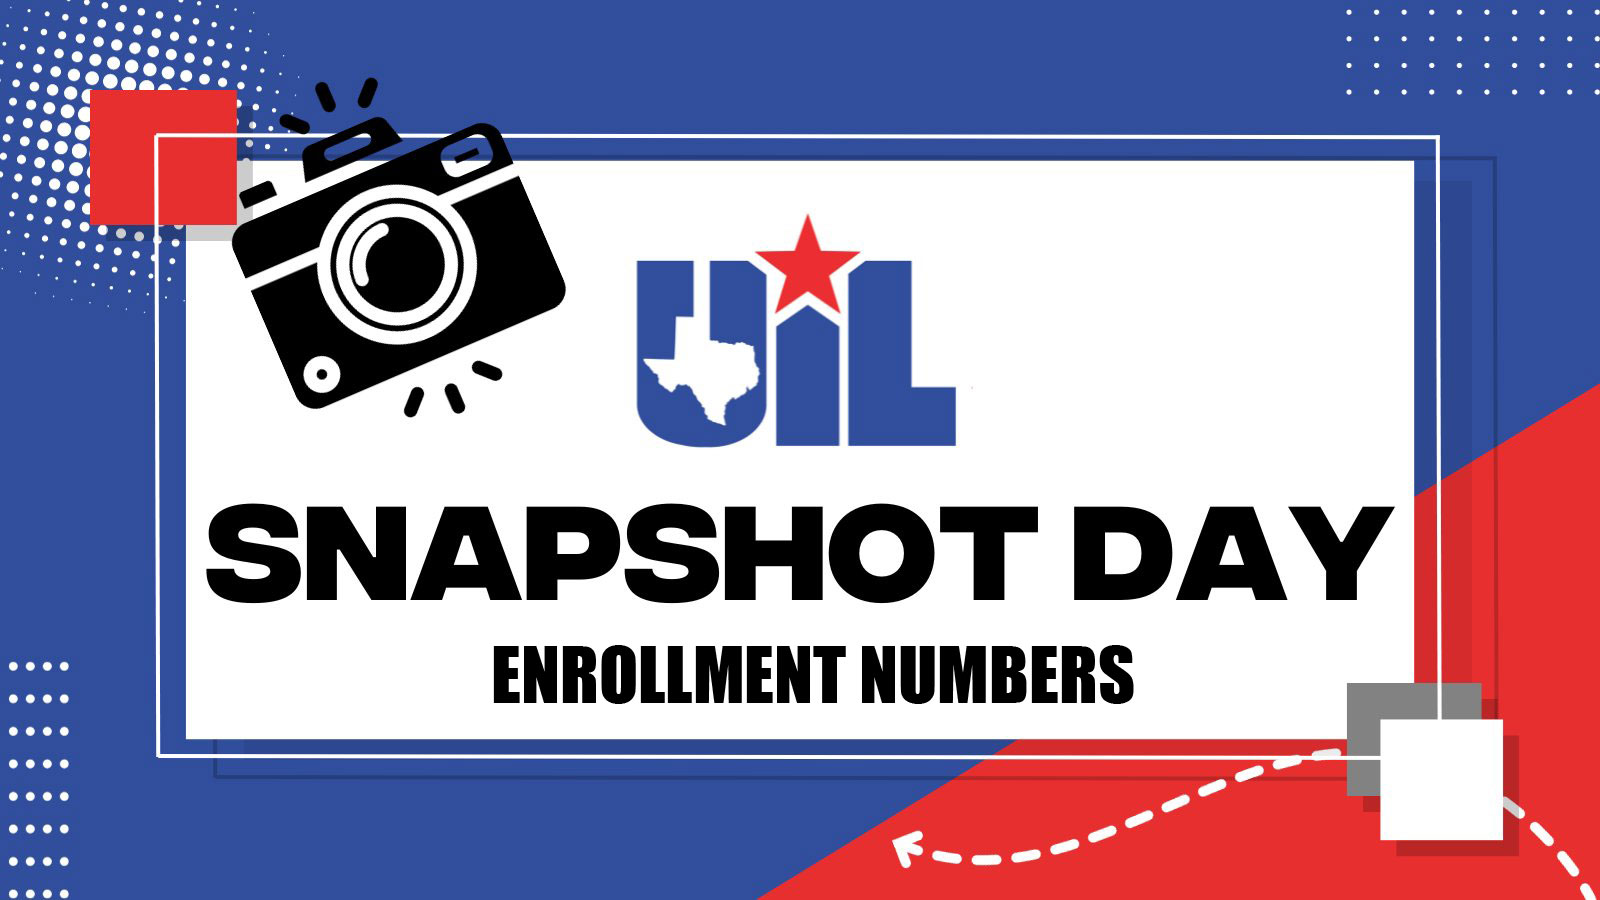 UIL Enrollment numbers released